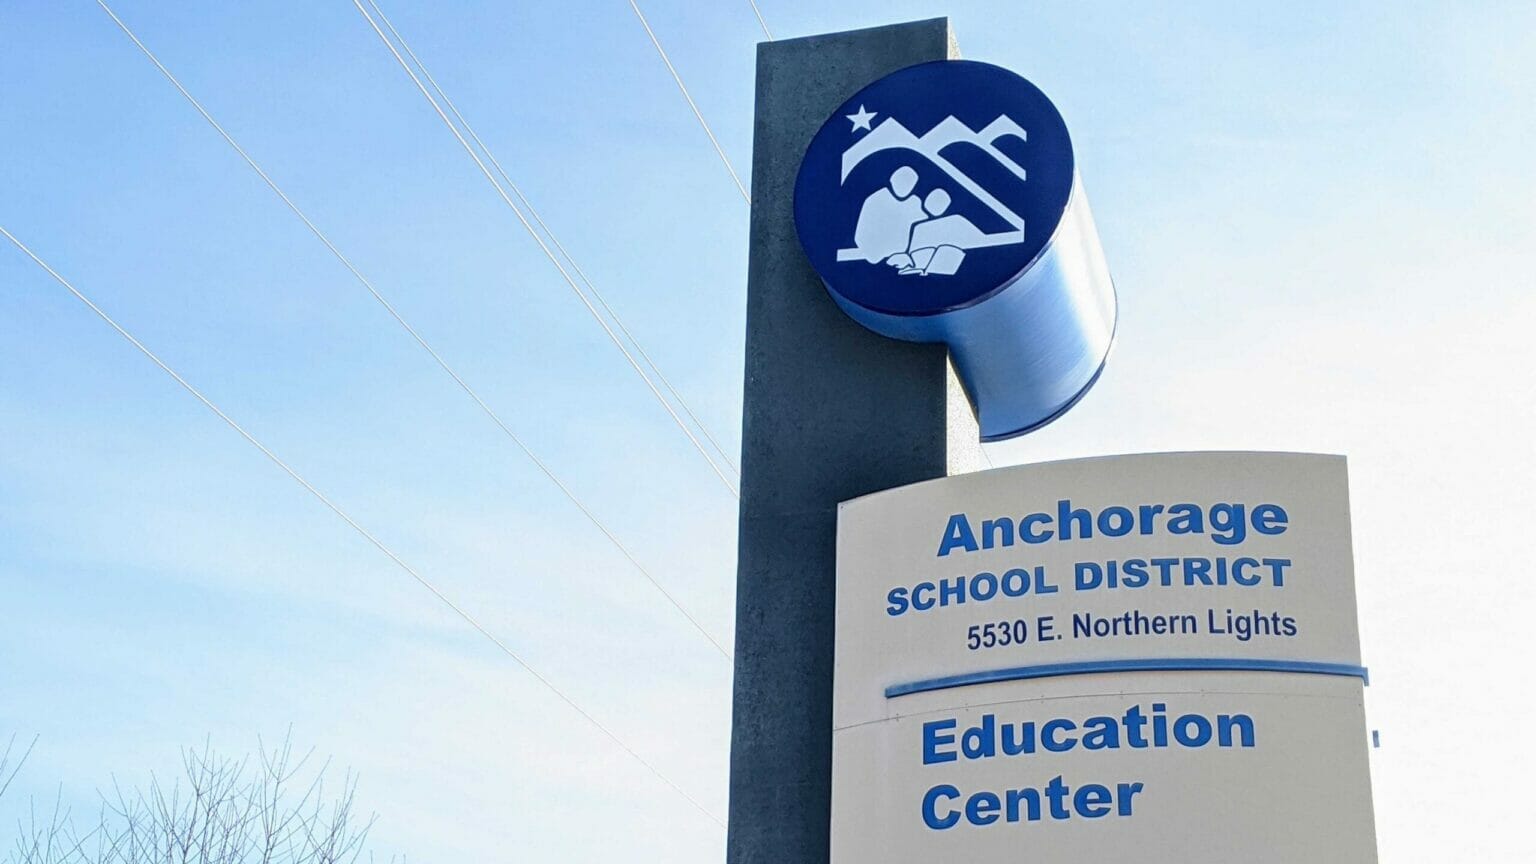 Justice Department says Anchorage schools ‘repeatedly and unreasonably’ isolated and restricted students with disabilities